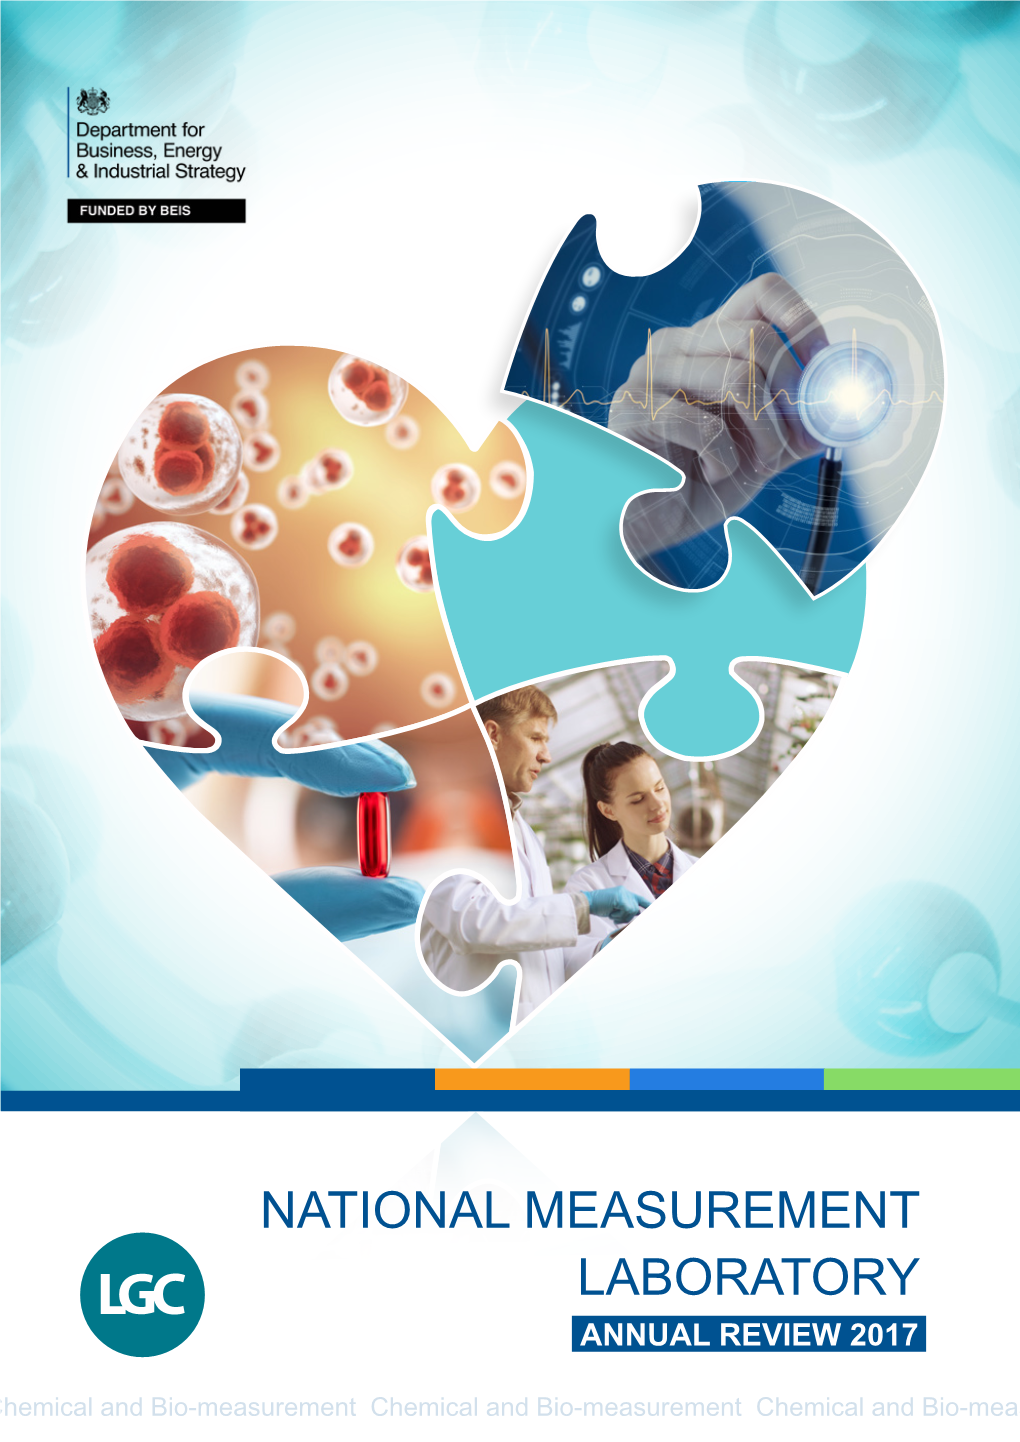 National Measurement Laboratory Annual Review 2017